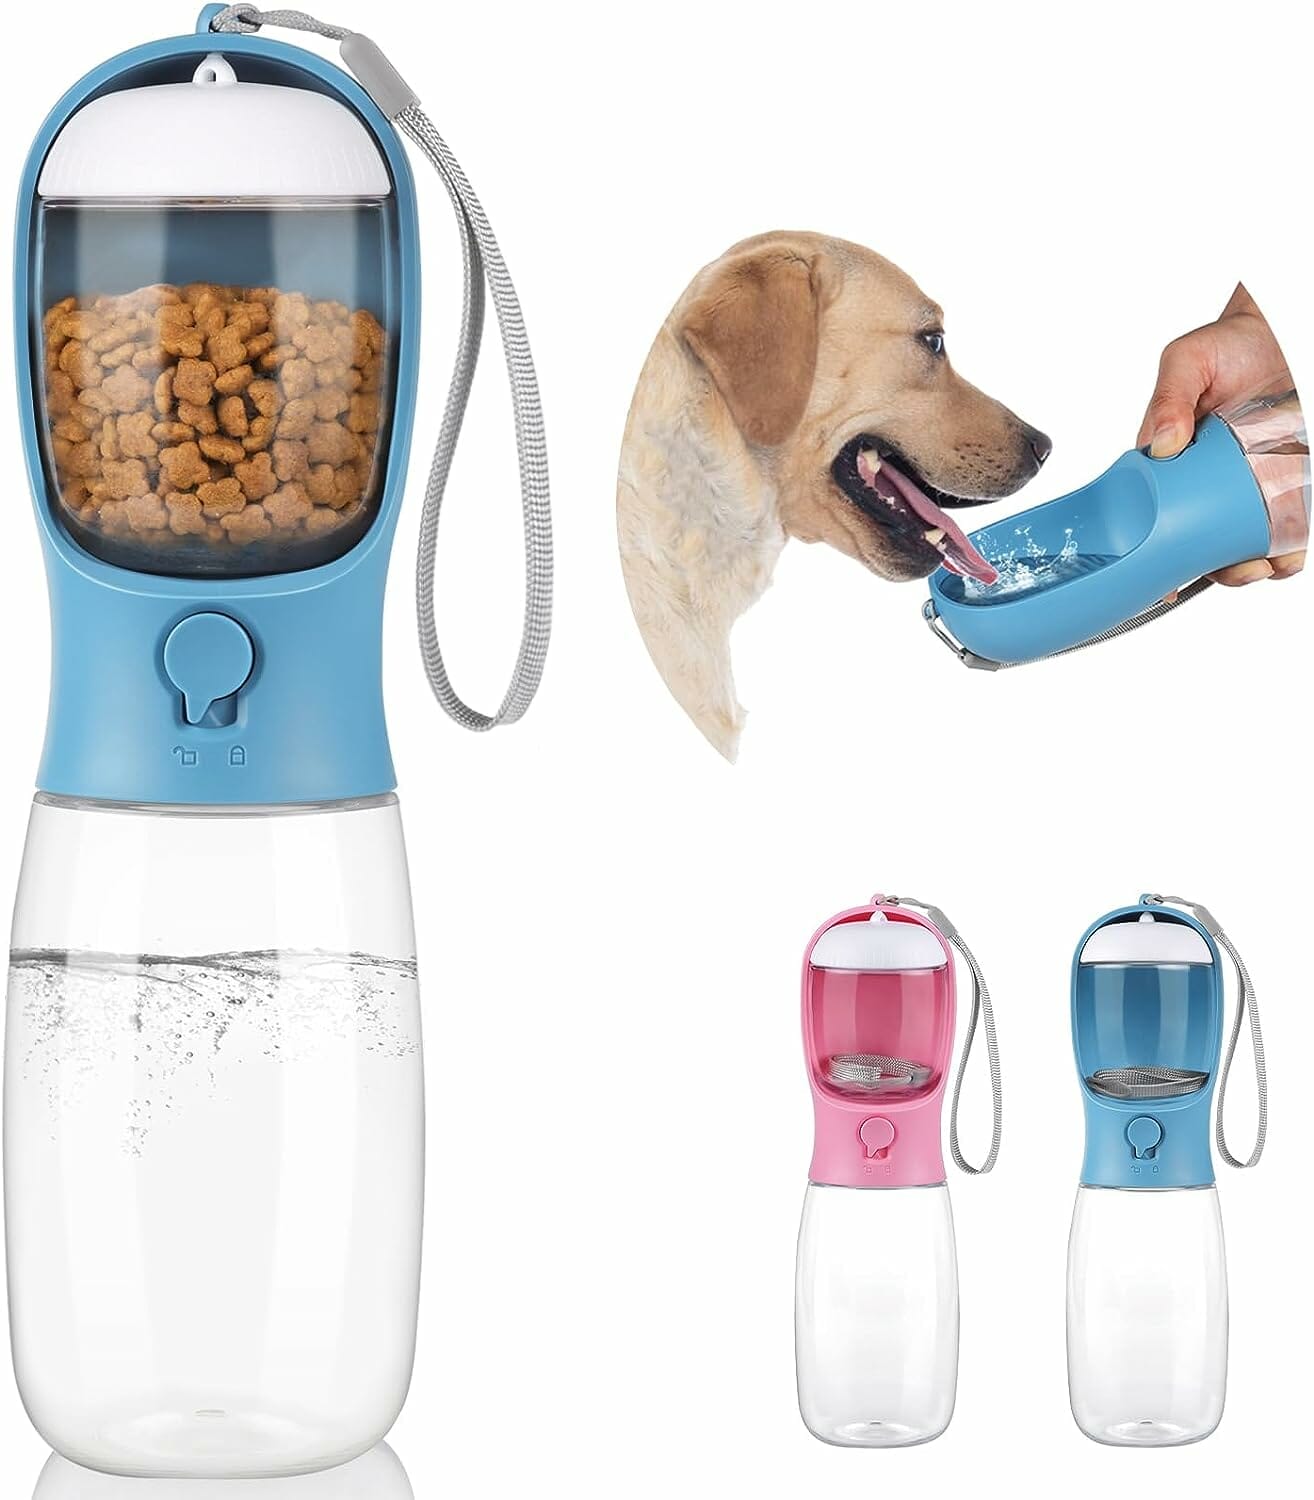 Kytely Dog Water Bottle Review